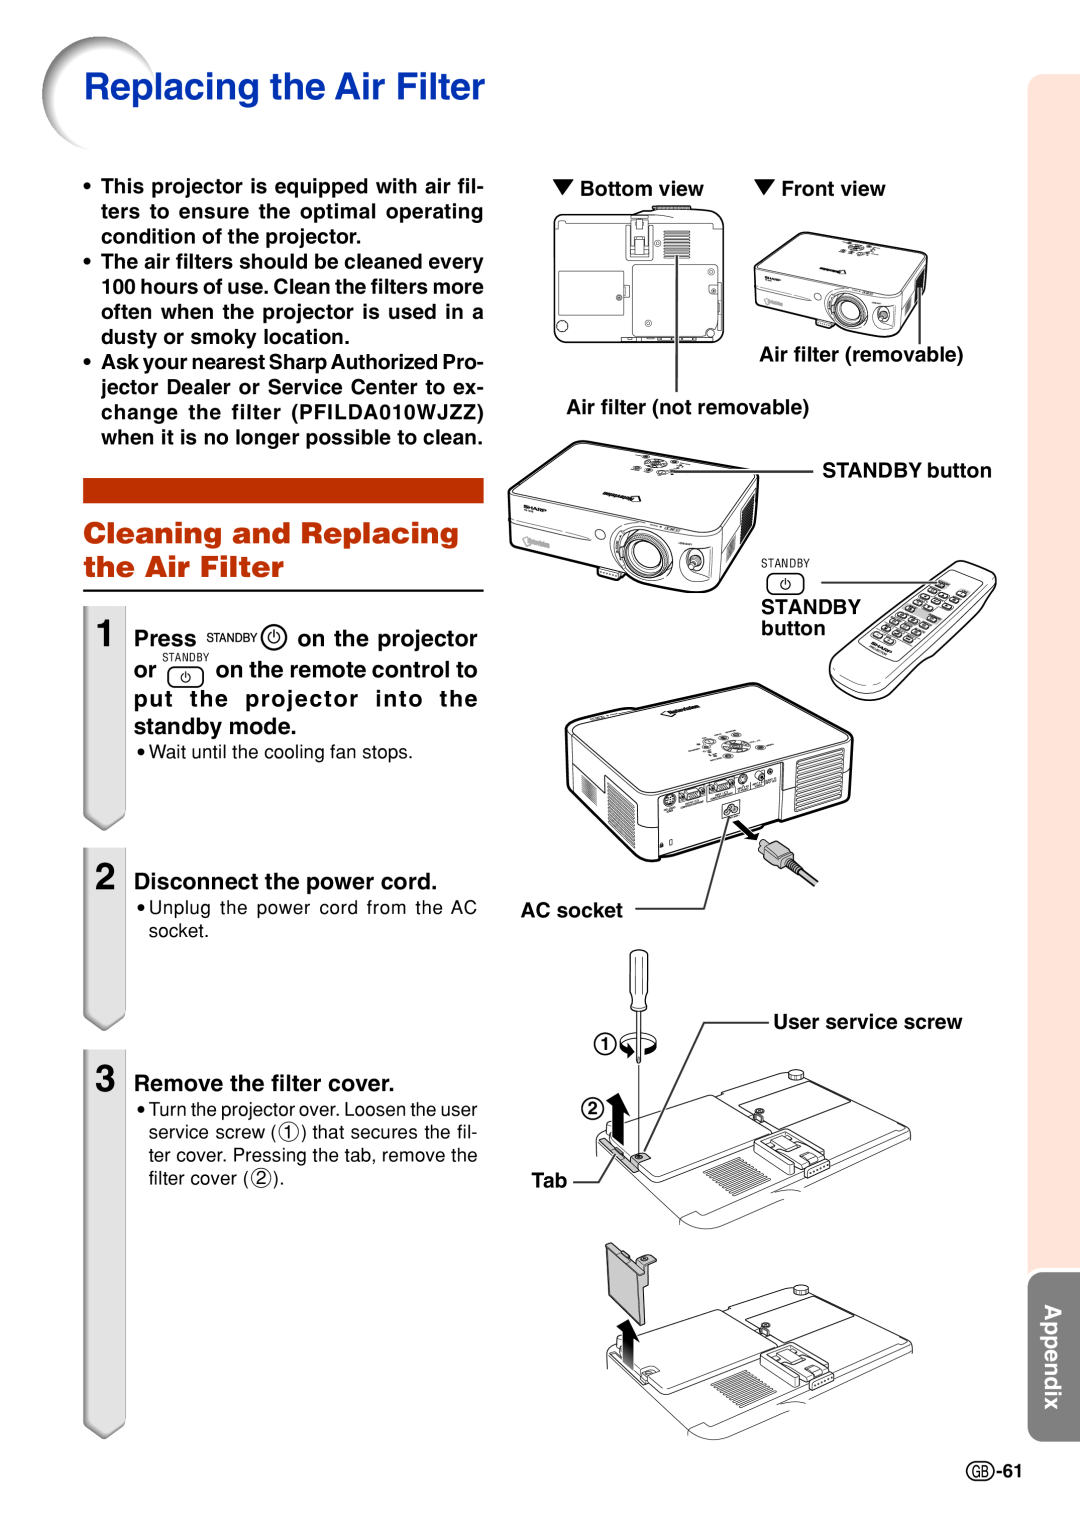 Sharp PG-B10S Cleaning and Replacing the Air Filter, put the projector into the standby mode, Remove the filter cover 